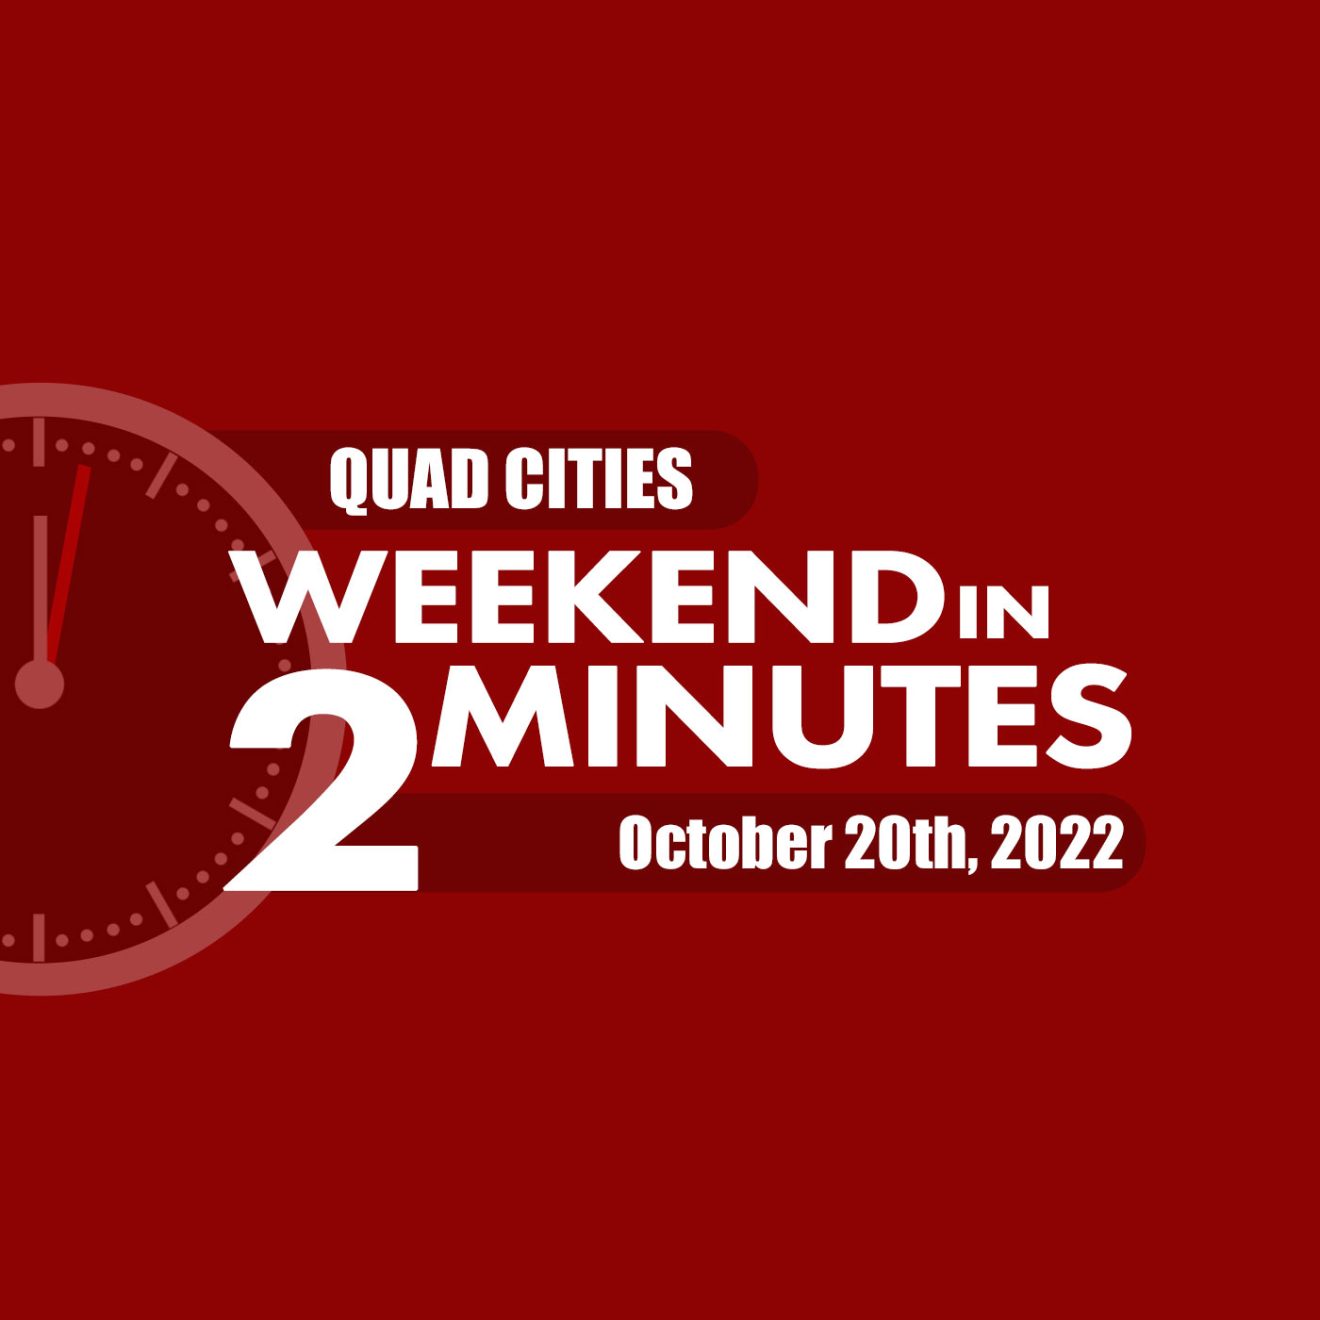 Quad Cities Midwest Week Quad Cities Weekend In 2 Minutes – October 20th, 2022